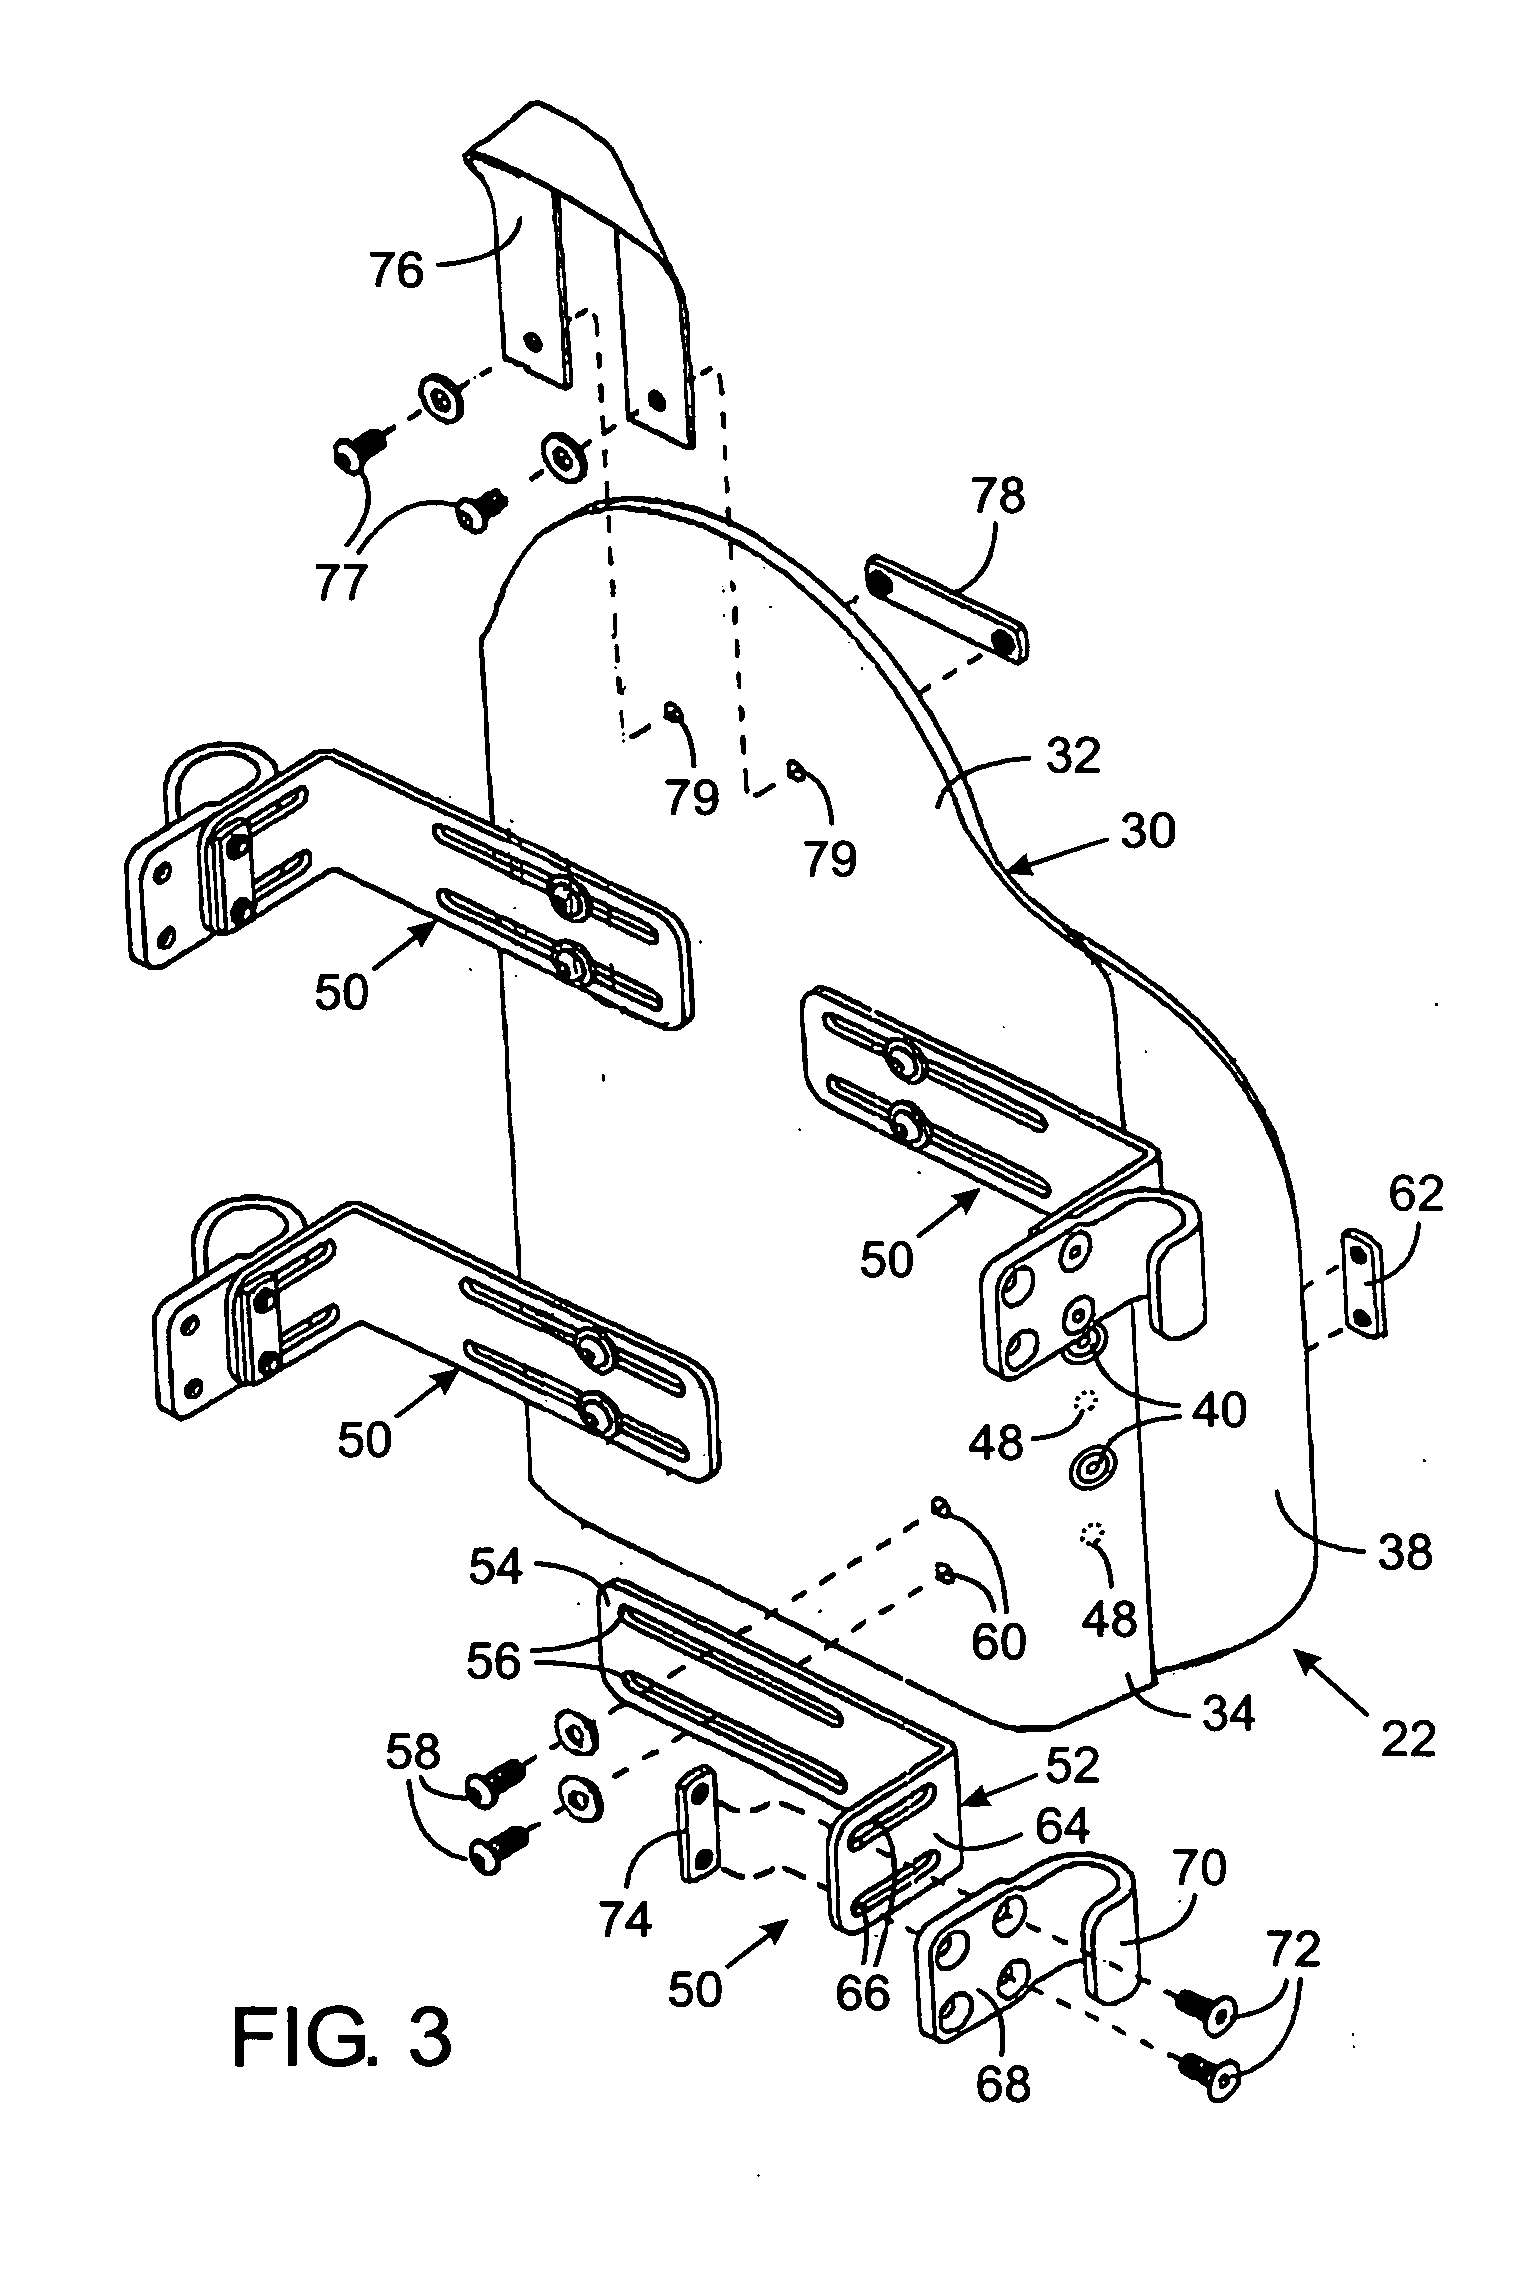 Adjustable seat back for a wheelchair